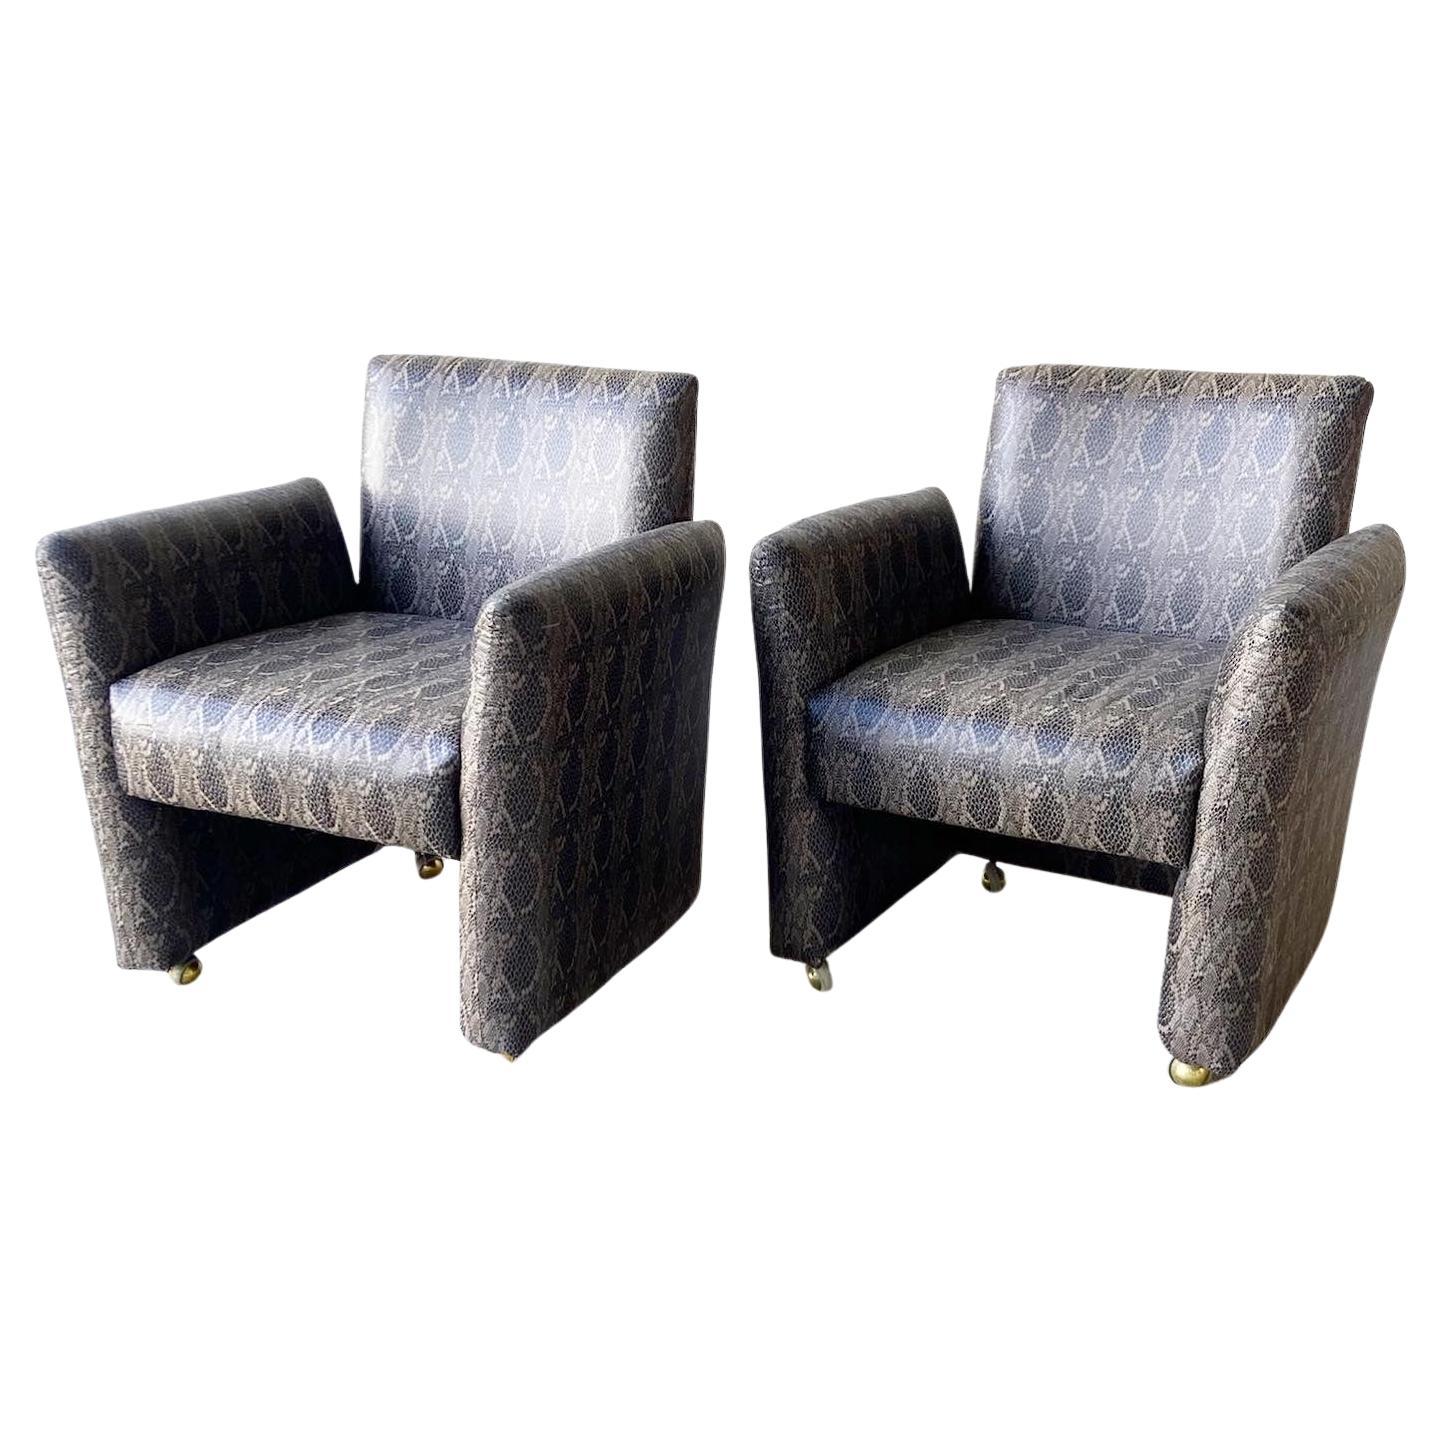 Postmodern Faux Snake Skin Upholstered Chiclet Arm Chairs on Wheels, a Pair